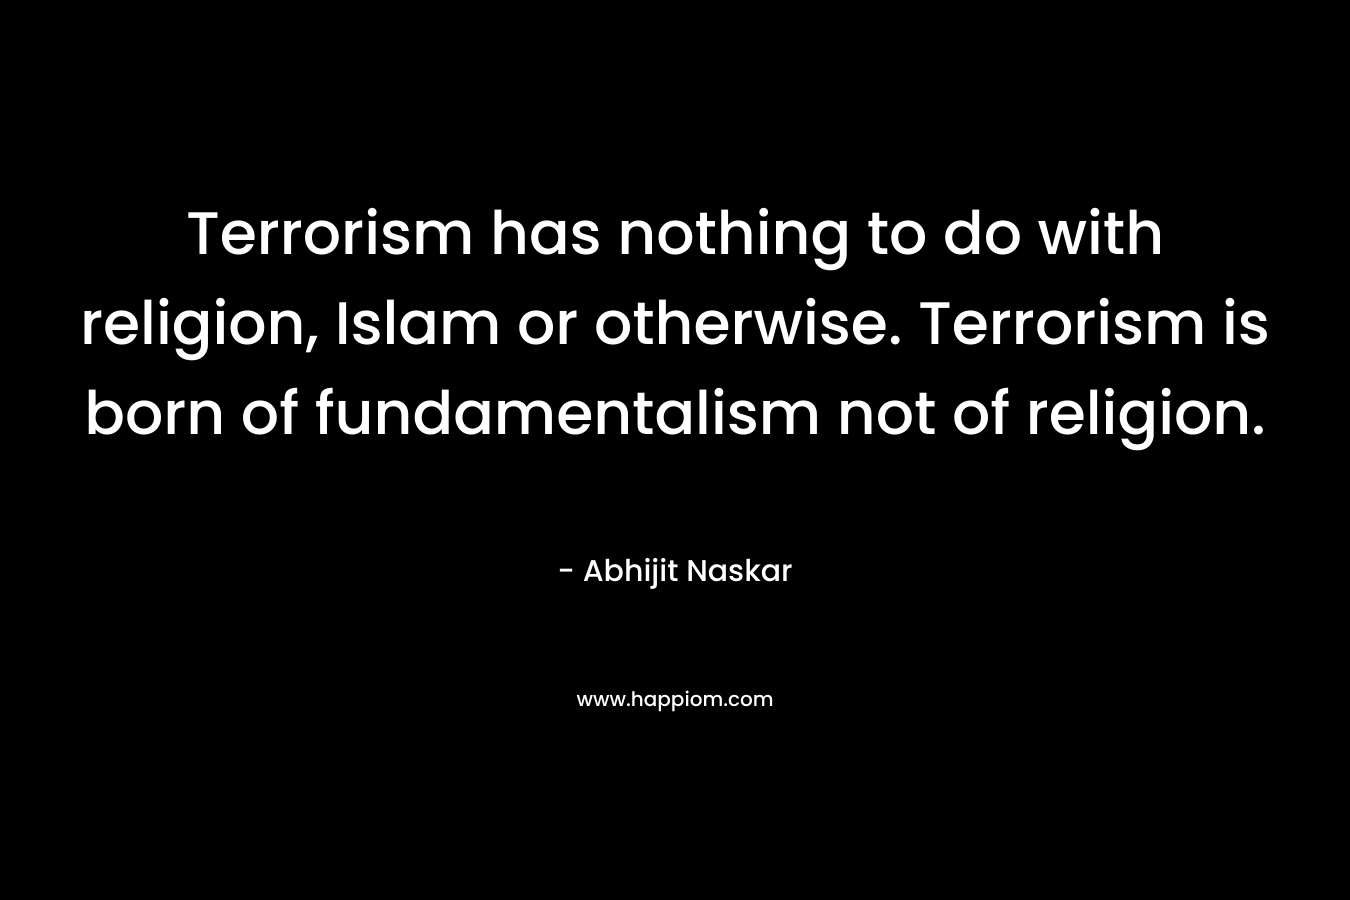 Terrorism has nothing to do with religion, Islam or otherwise. Terrorism is born of fundamentalism not of religion. – Abhijit Naskar